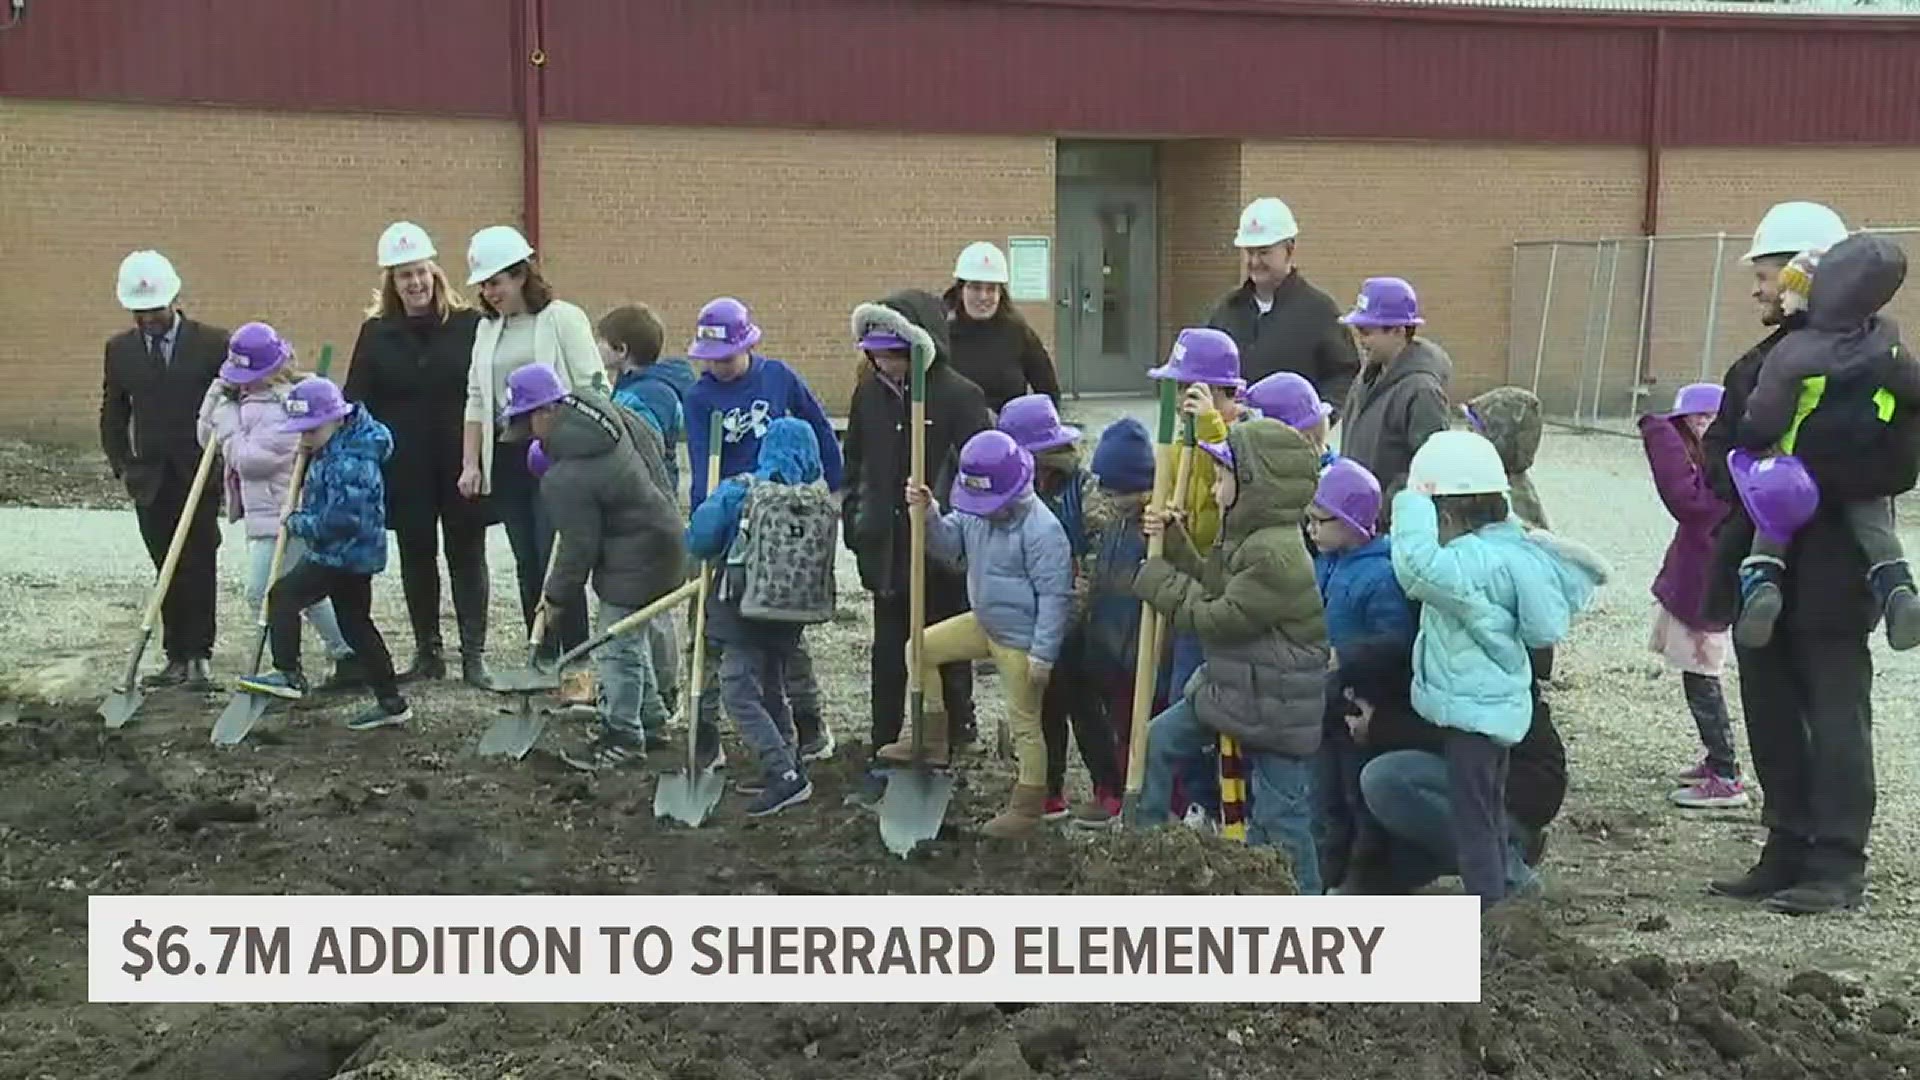 It's the first major expansion for Sherrard elementary in over 20 years.